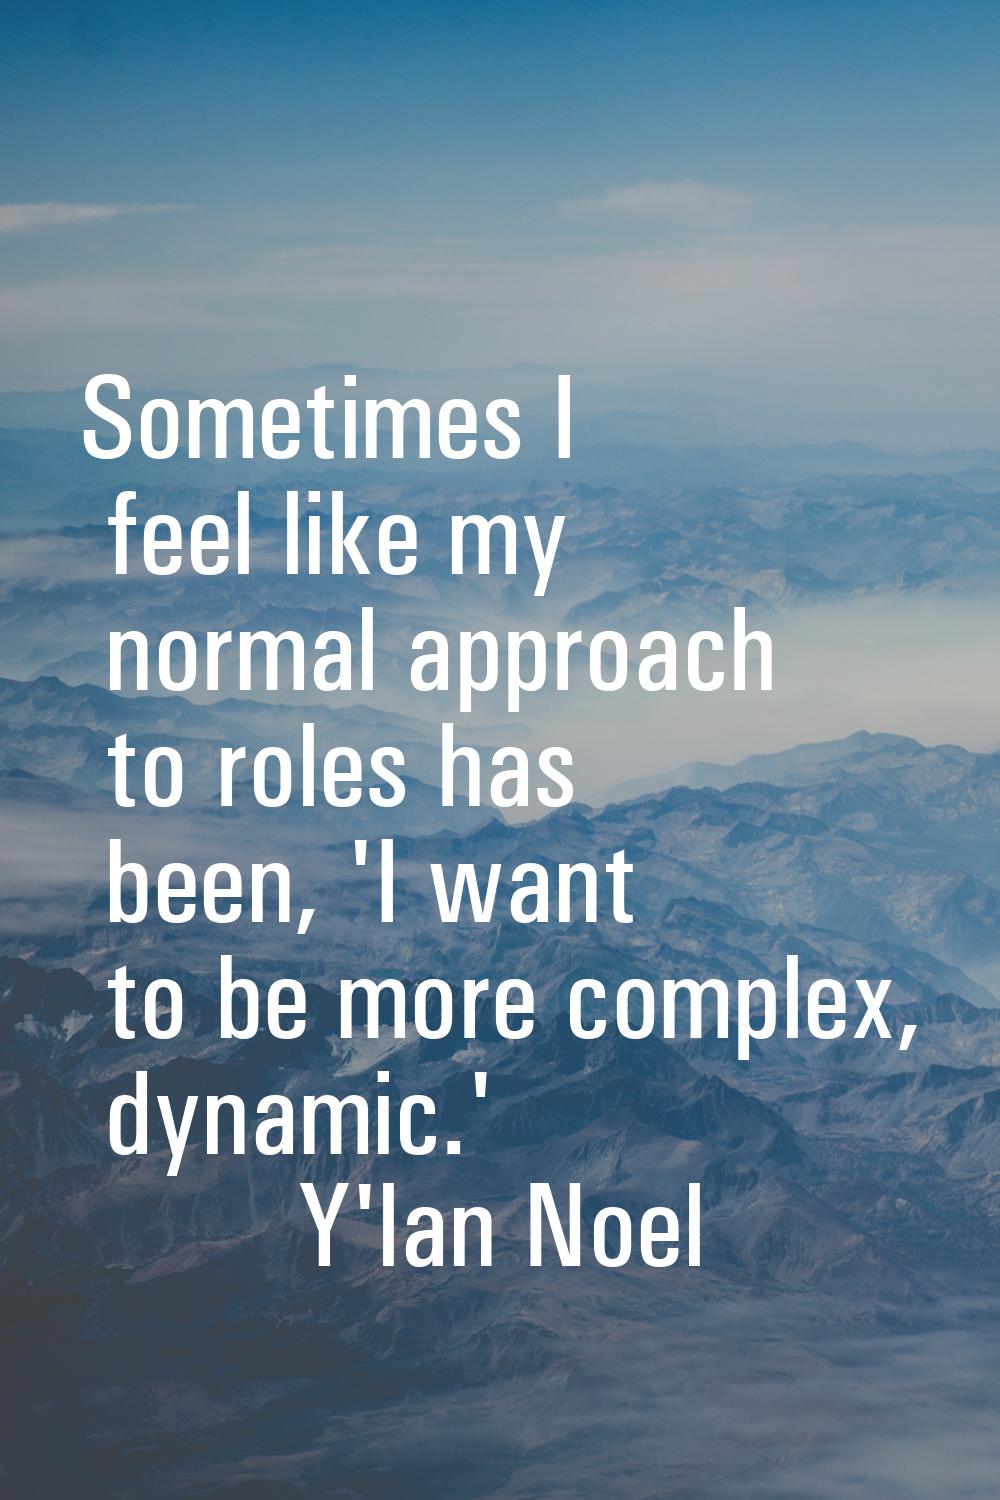 Sometimes I feel like my normal approach to roles has been, 'I want to be more complex, dynamic.'